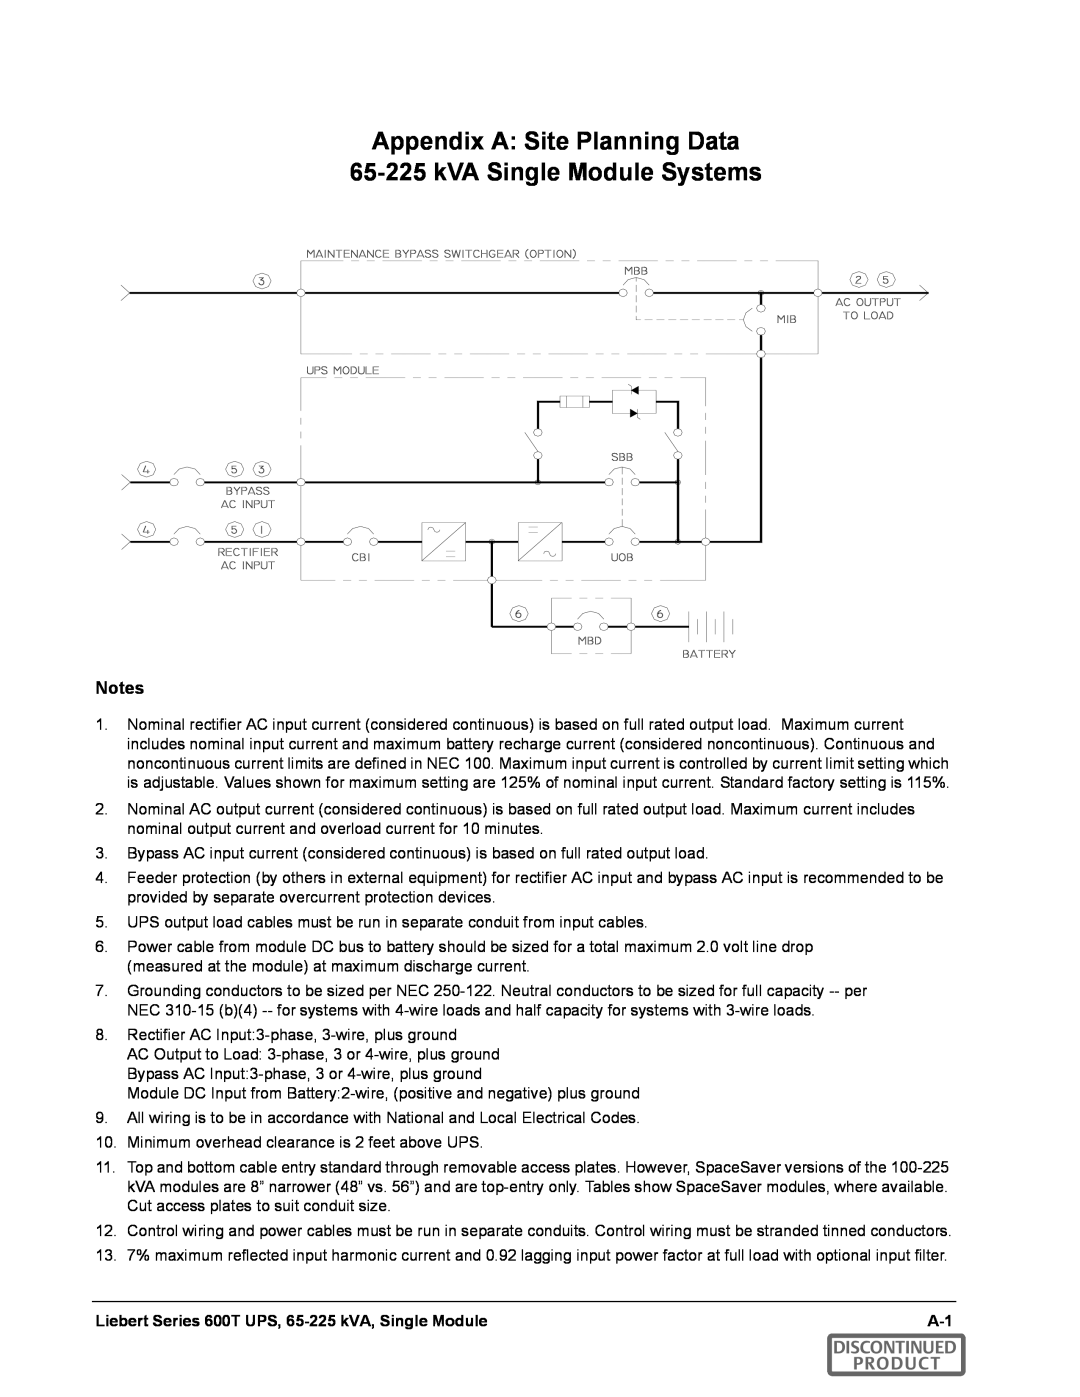 Emerson SERIES 600T manual Appendix A Site Planning Data 65-225 kVA Single Module Systems, Discontinued Product 